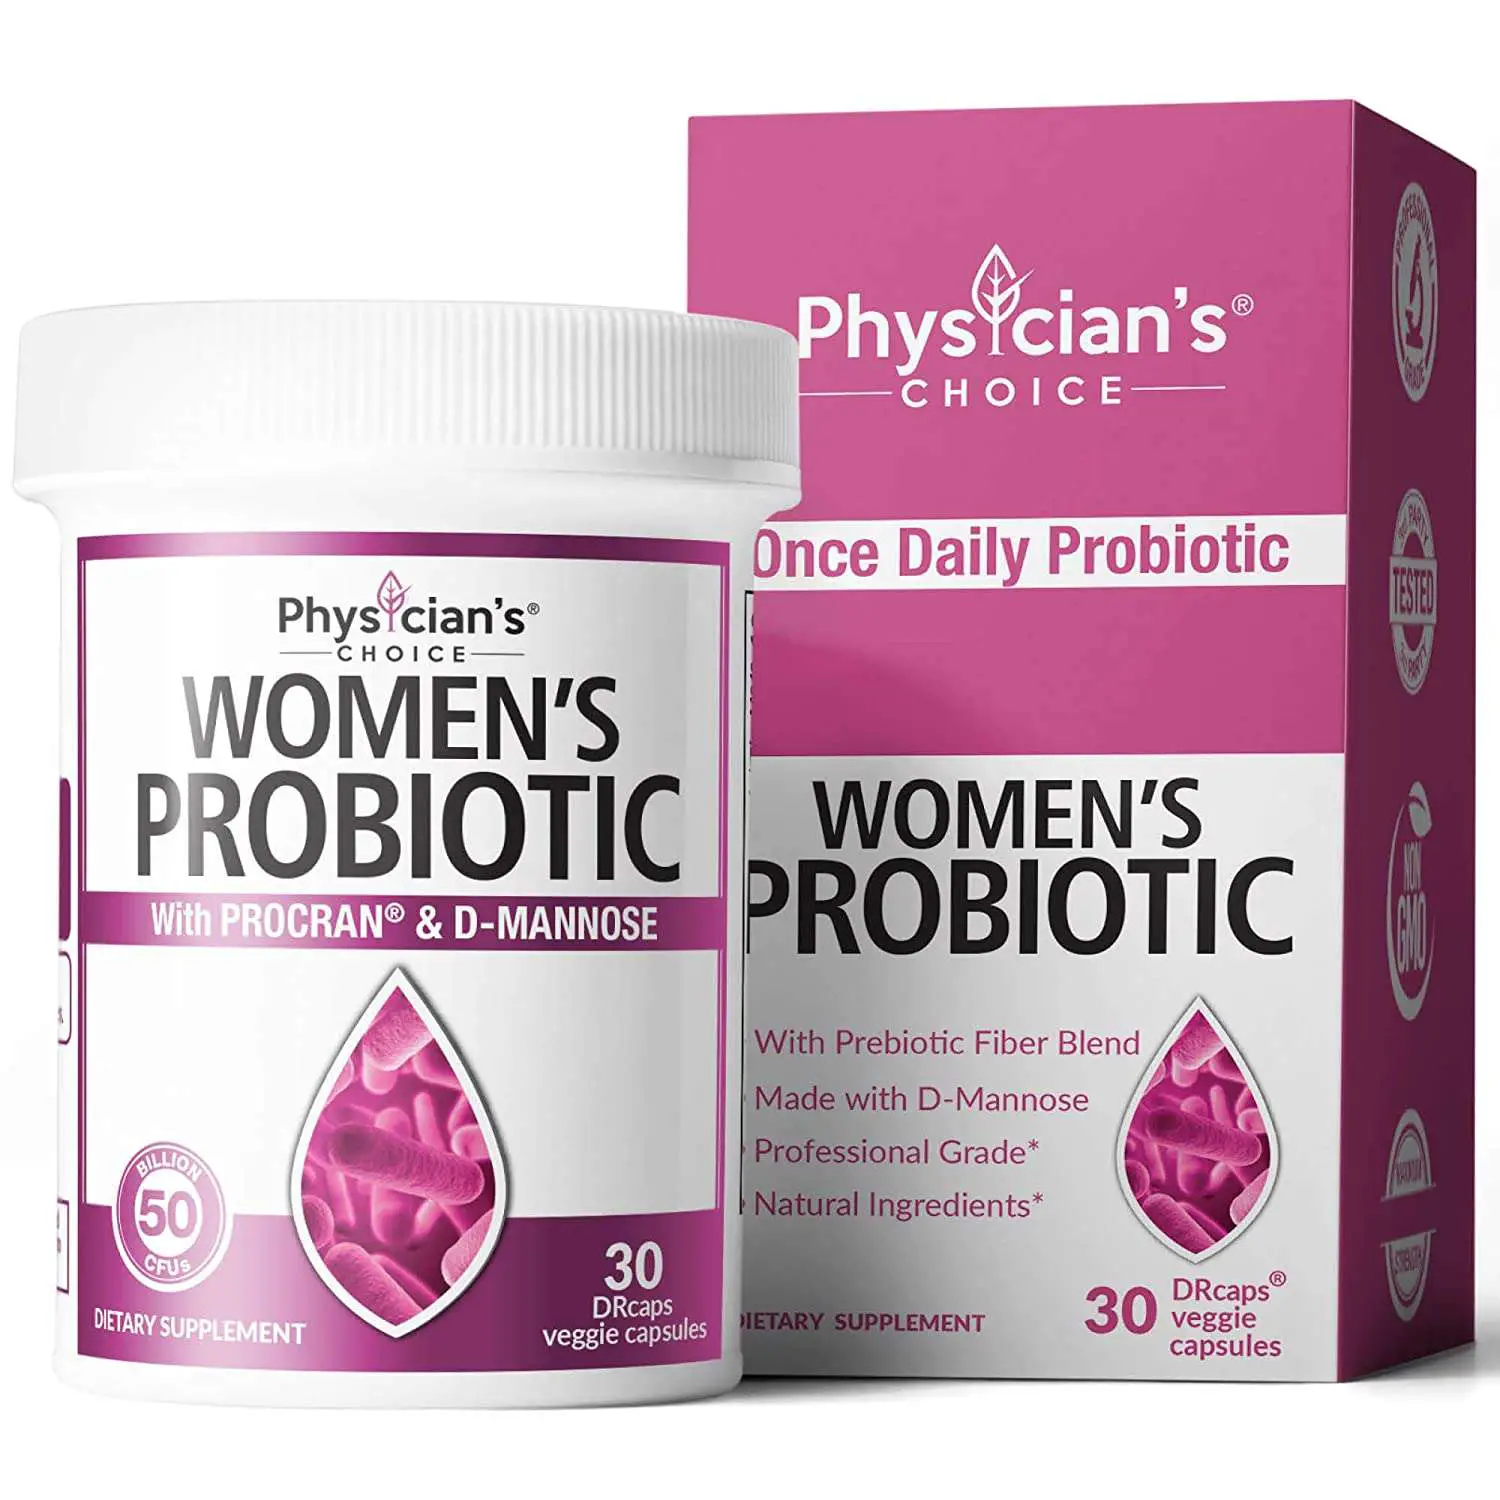 When is the best time to take a Probiotic